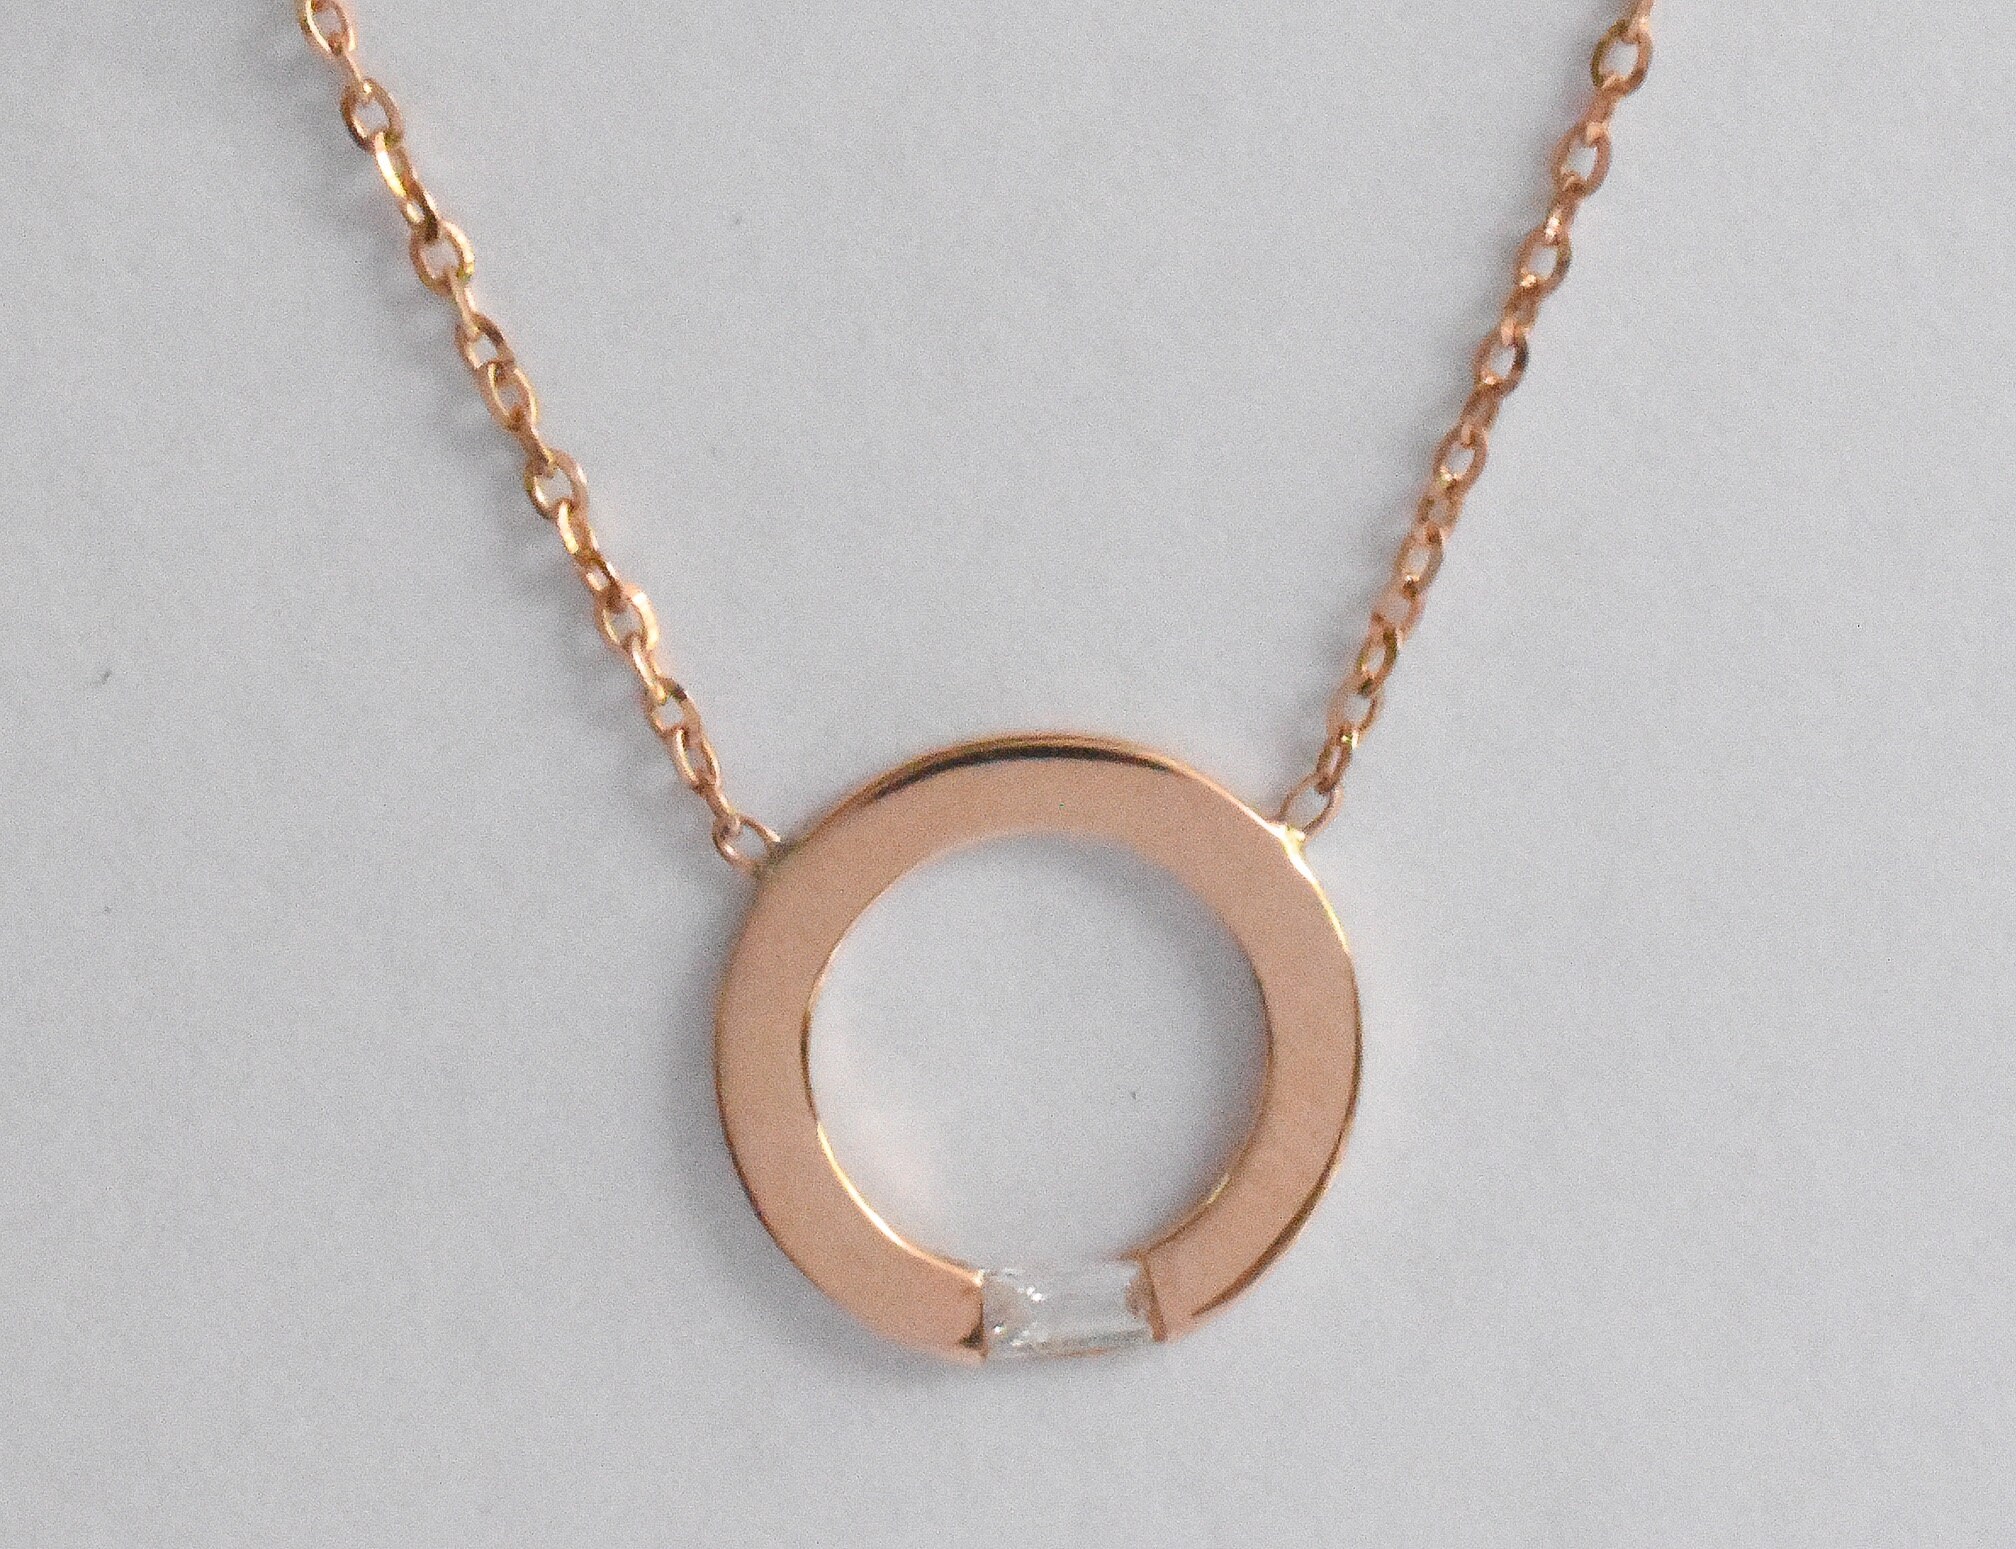 Baguette Diamond Pendant in 14K Gold/Circle Necklace With Solitaire Dainty Ojgd44/14